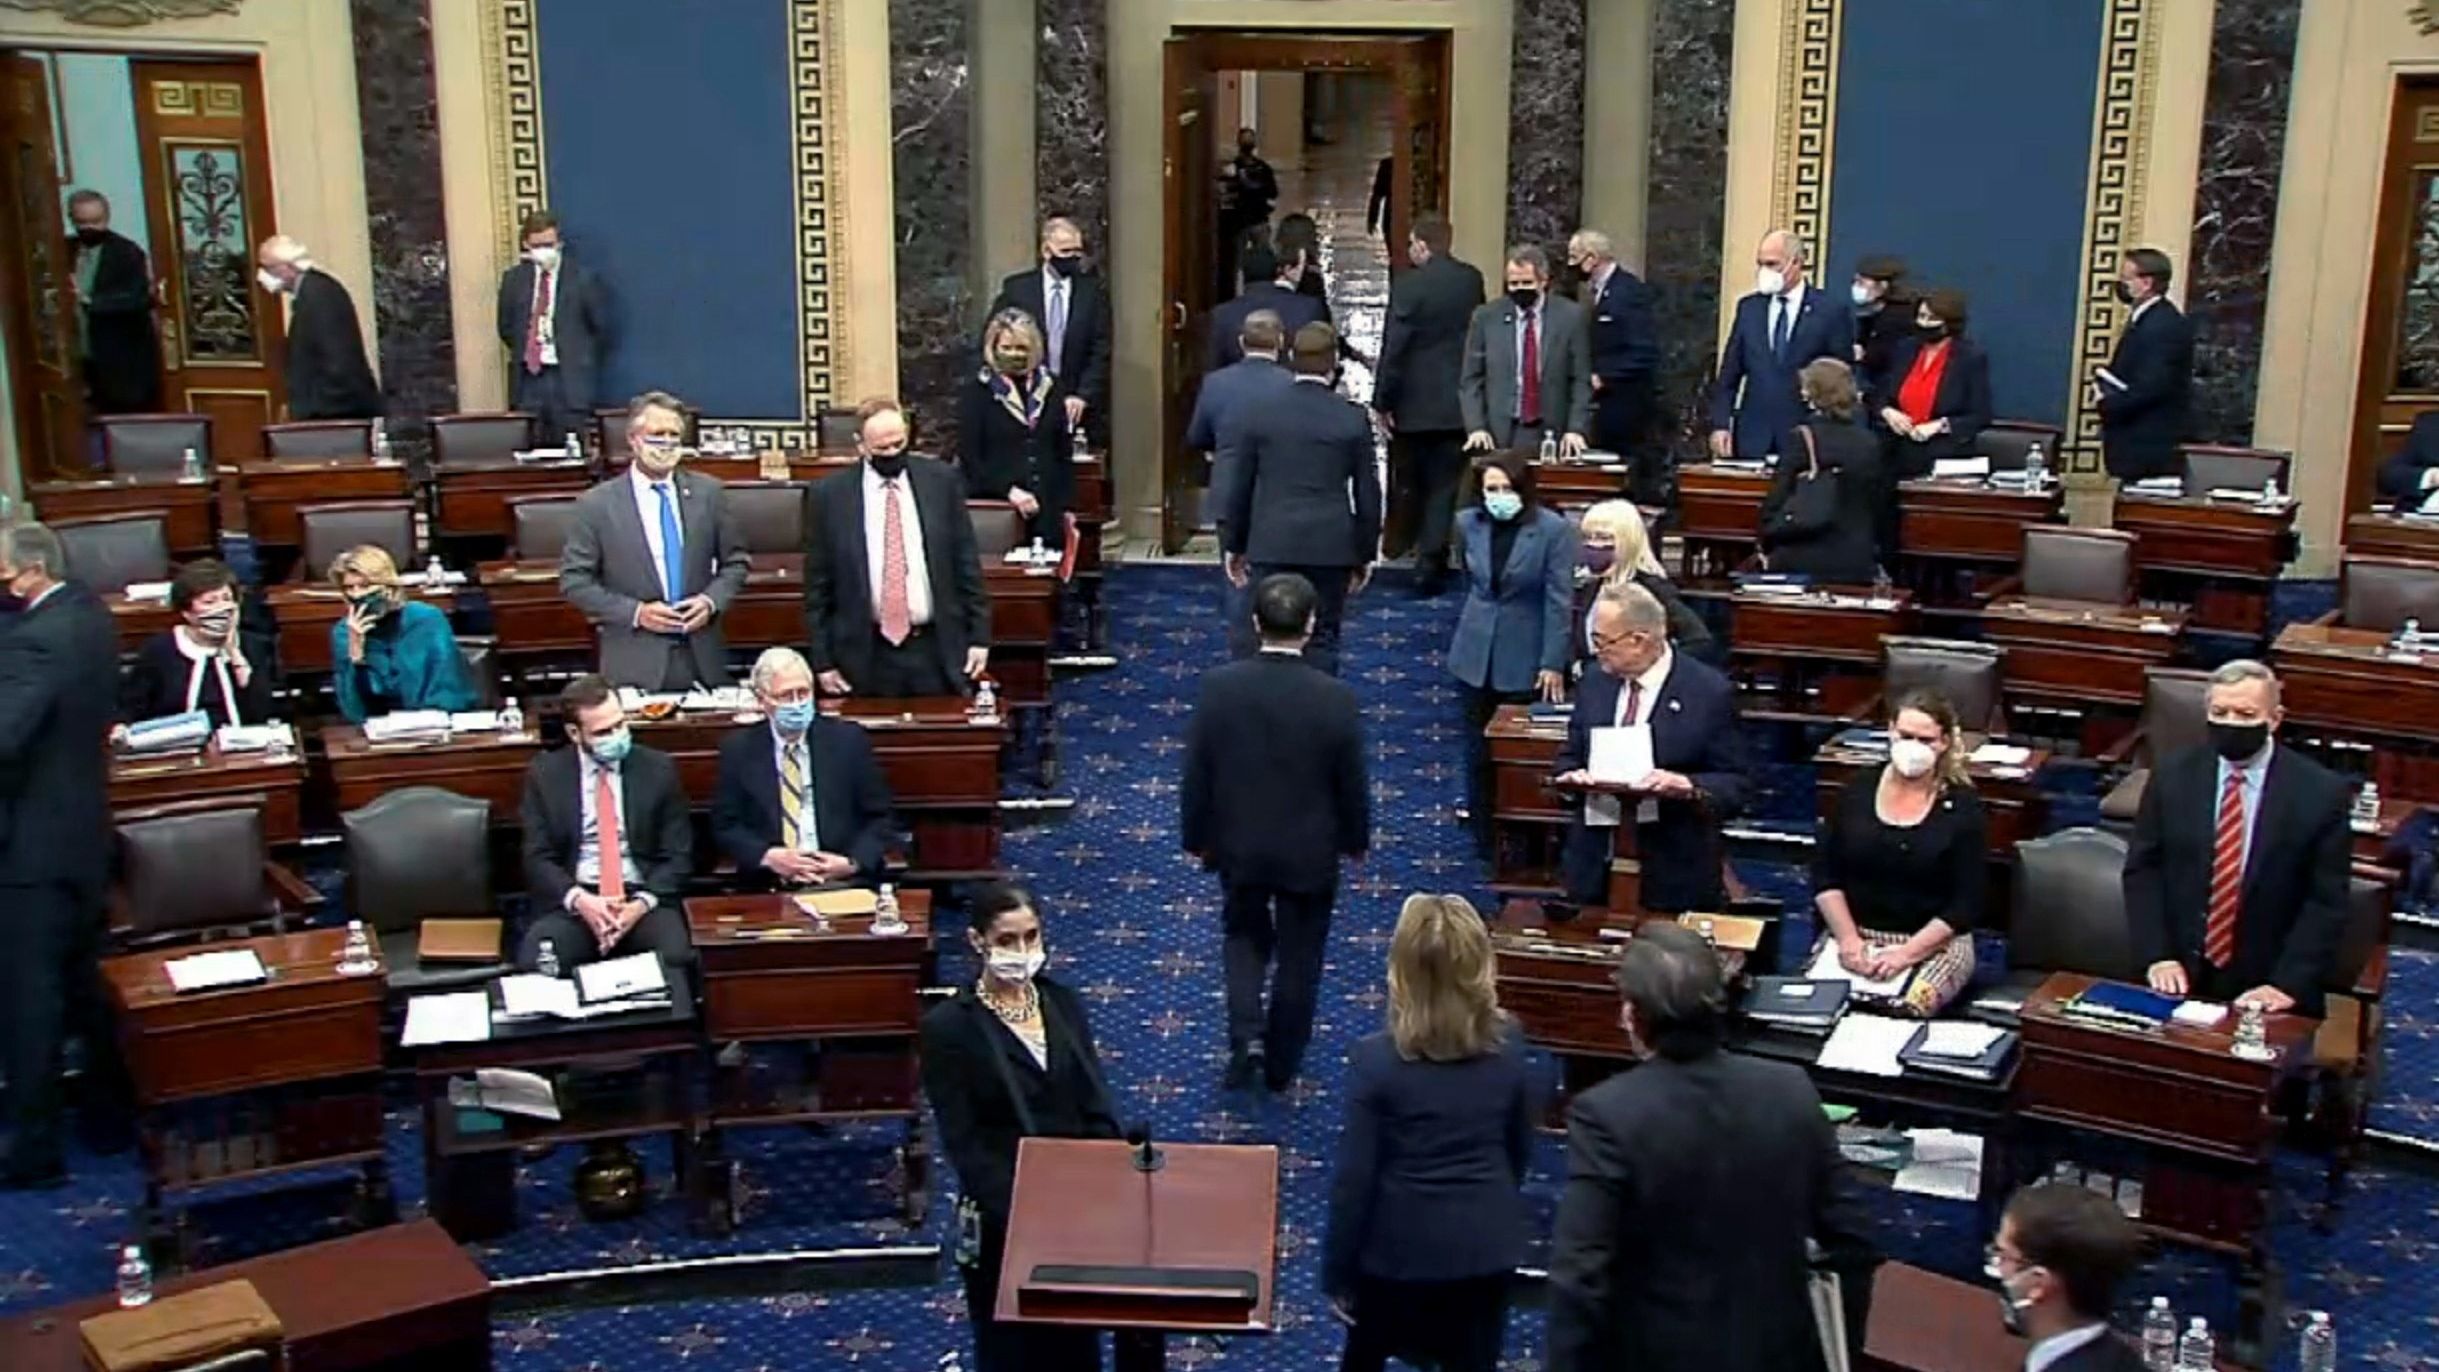 The House impeachment managers are escorted out of the Senate Chamber after the final vote Saturday.